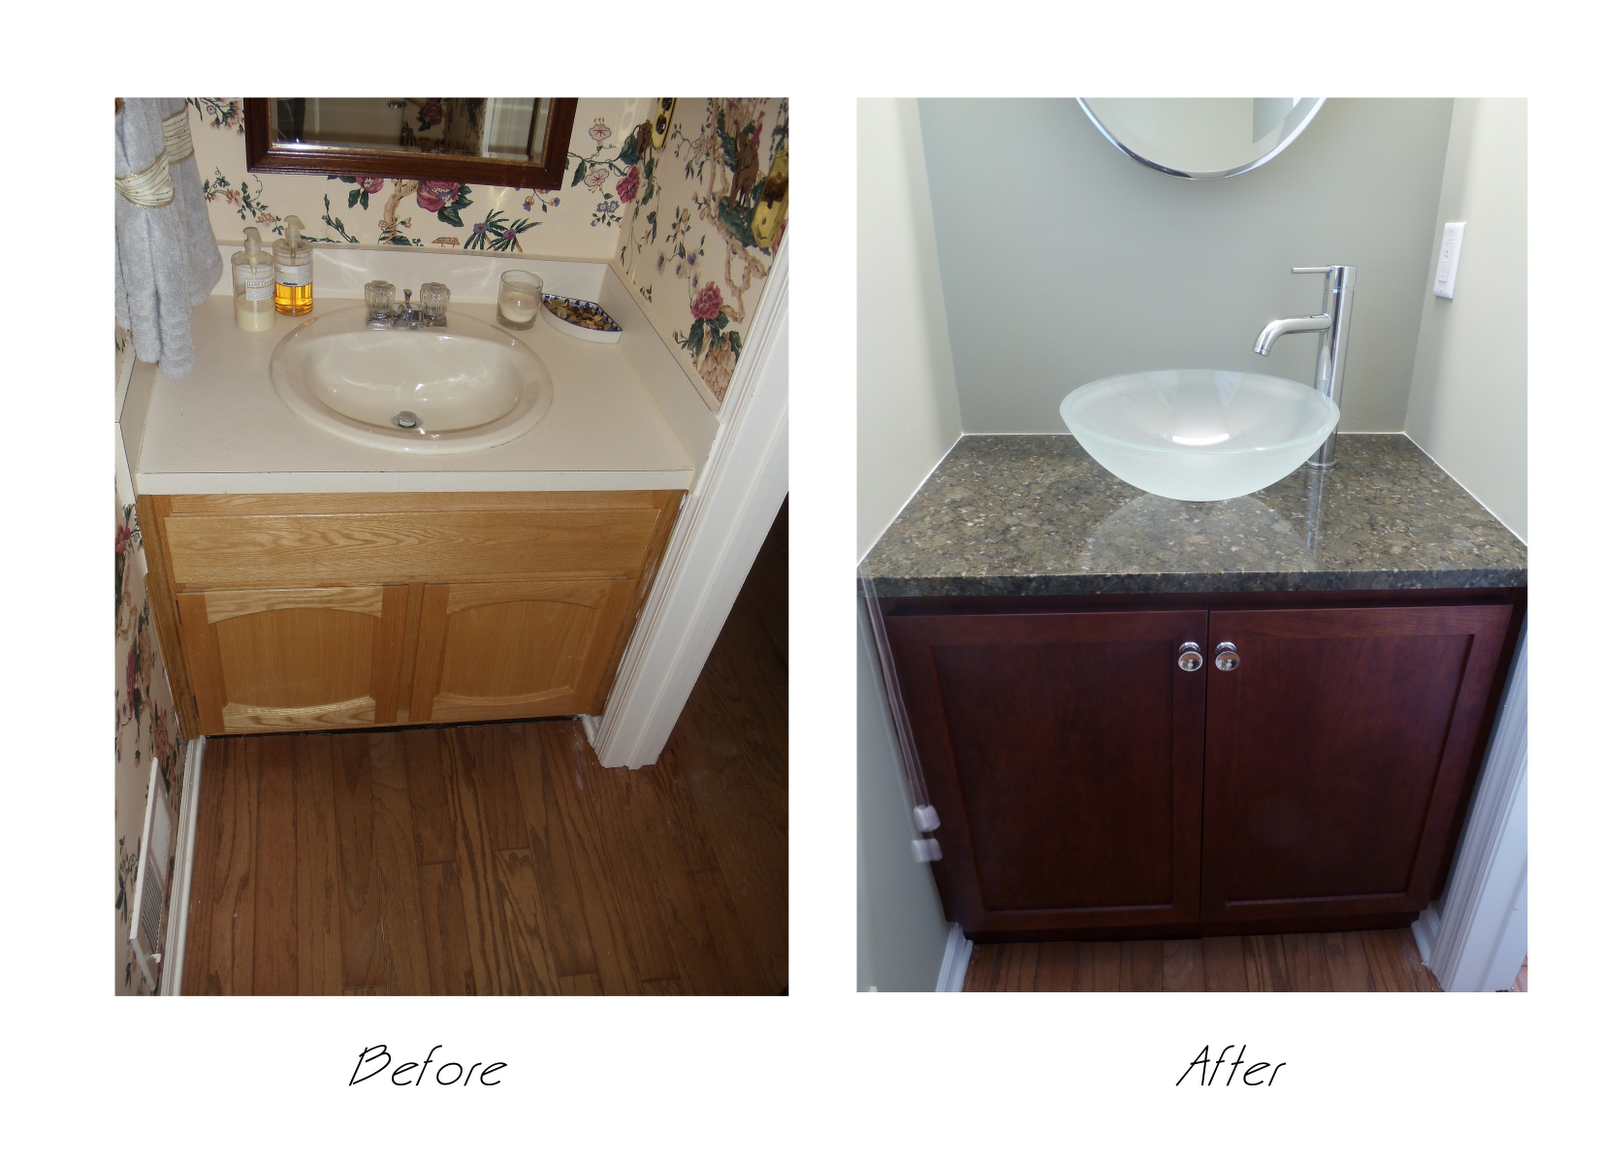 bathroom shower seats Removed plumbing fixtures and dated wallpaper and installed new glass 